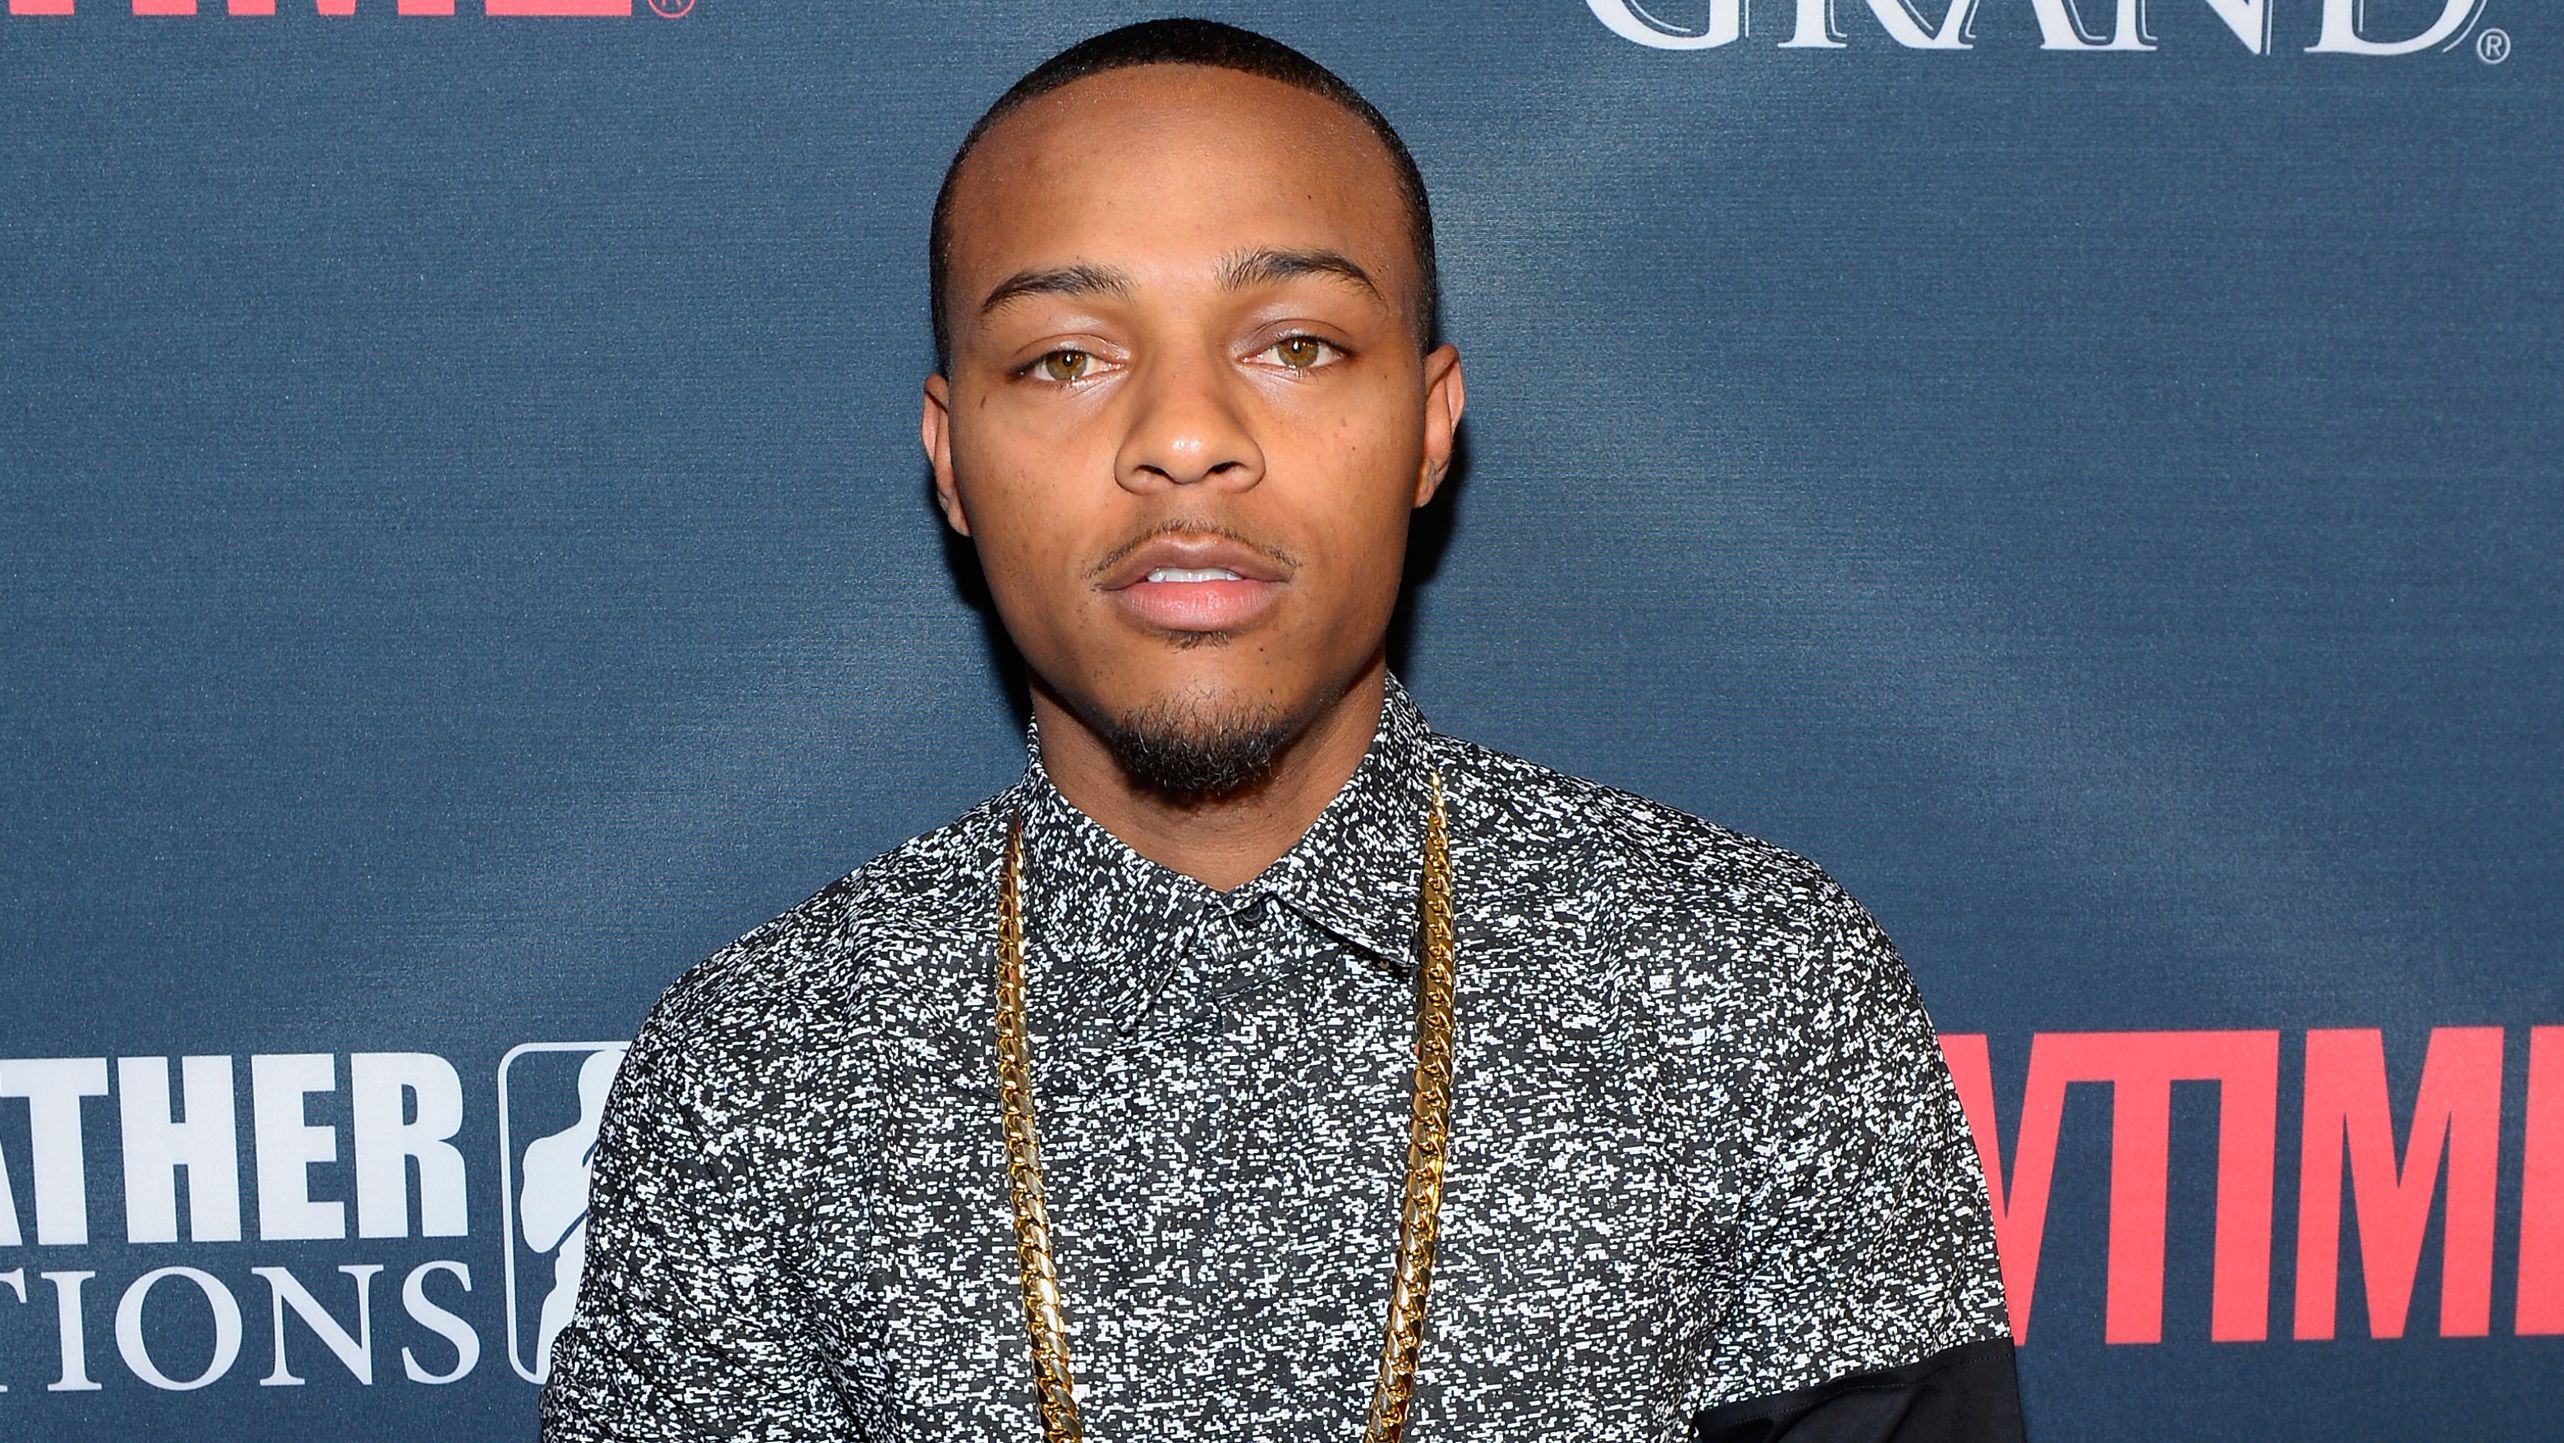 Rapper Bow Wow is seen at an event in Las Vegas in September 2015.